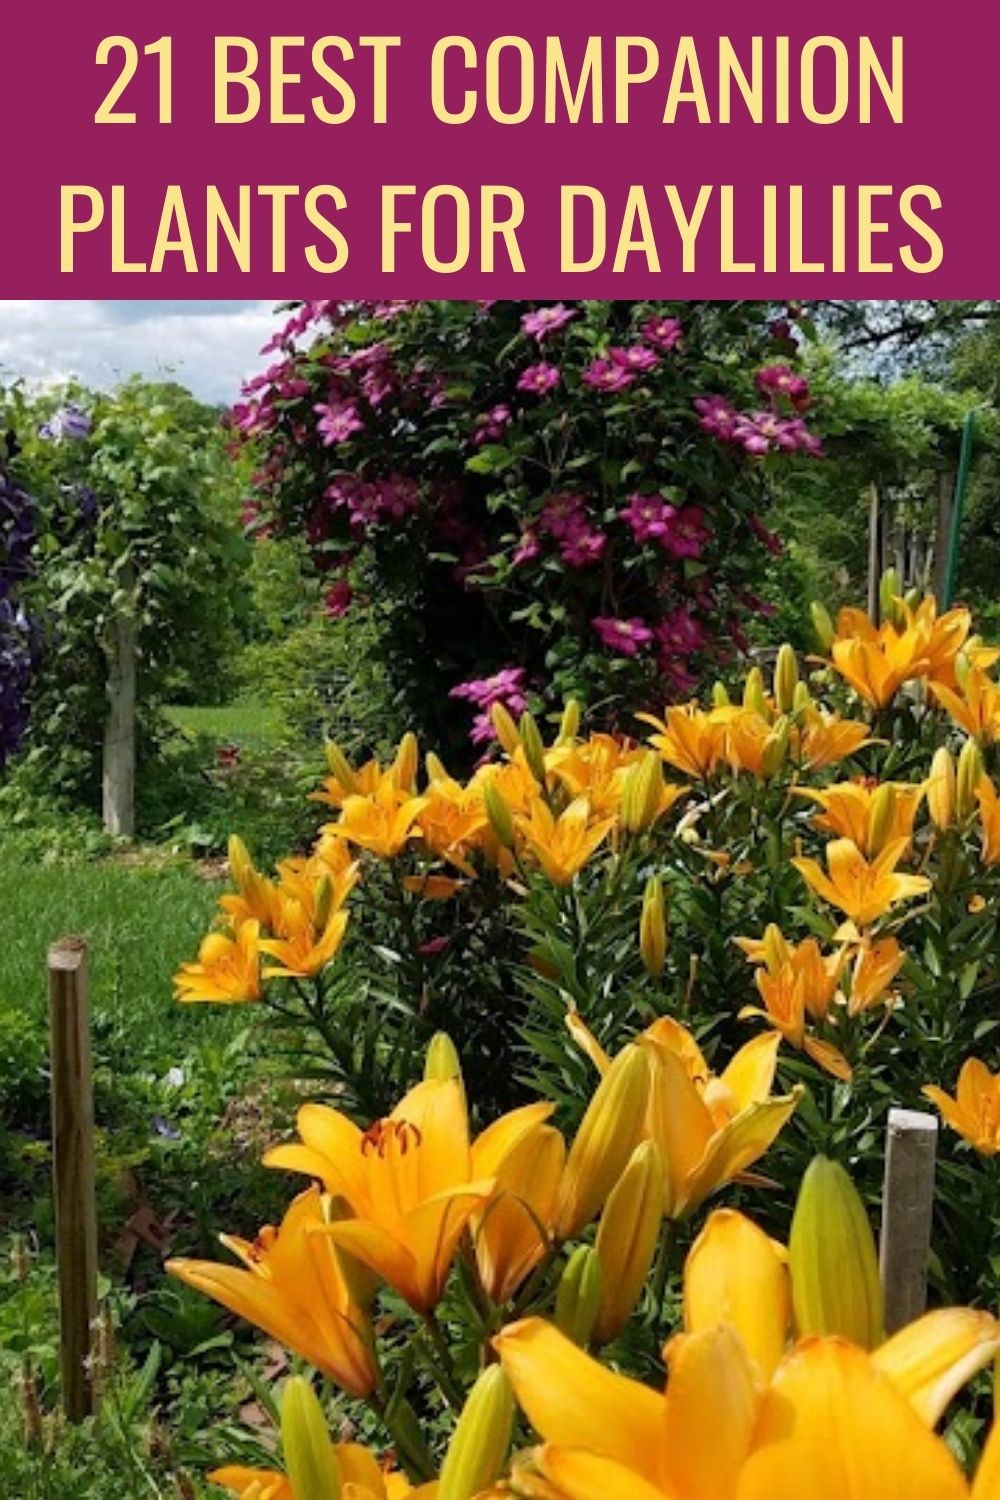 21 best companion plants for daylilies